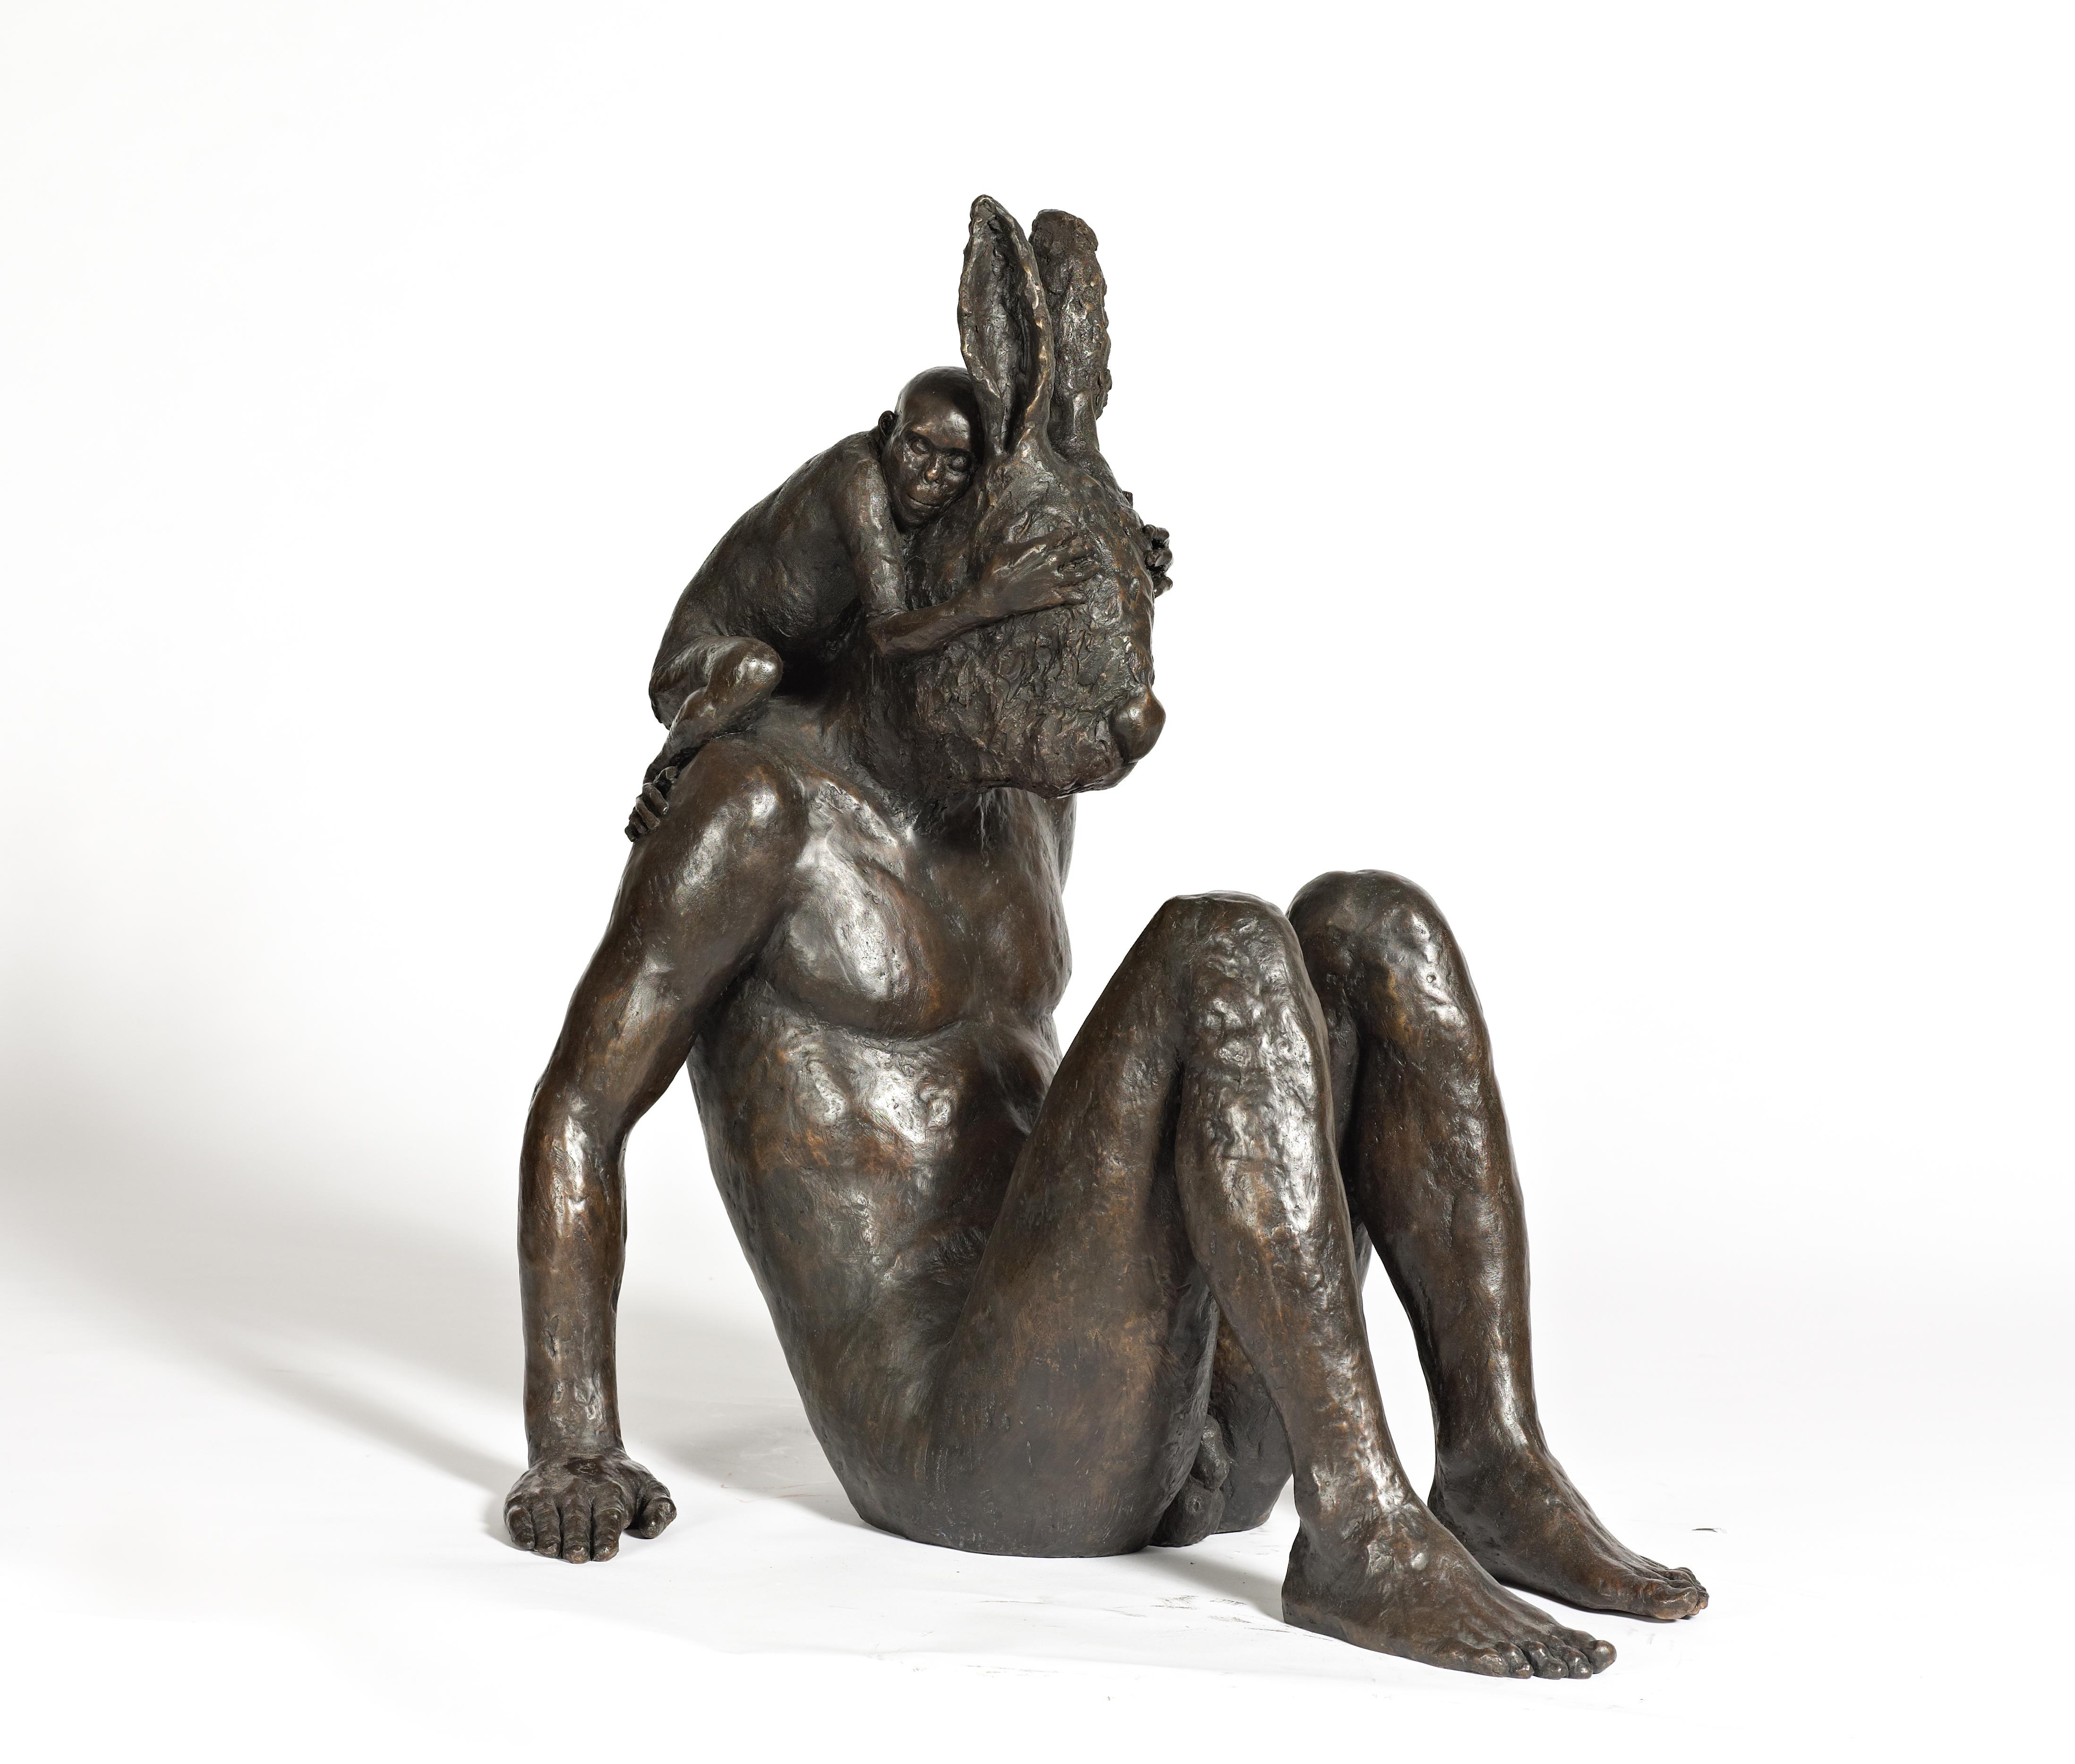 Beth Carter Figurative Sculpture - Monkey and Hare 